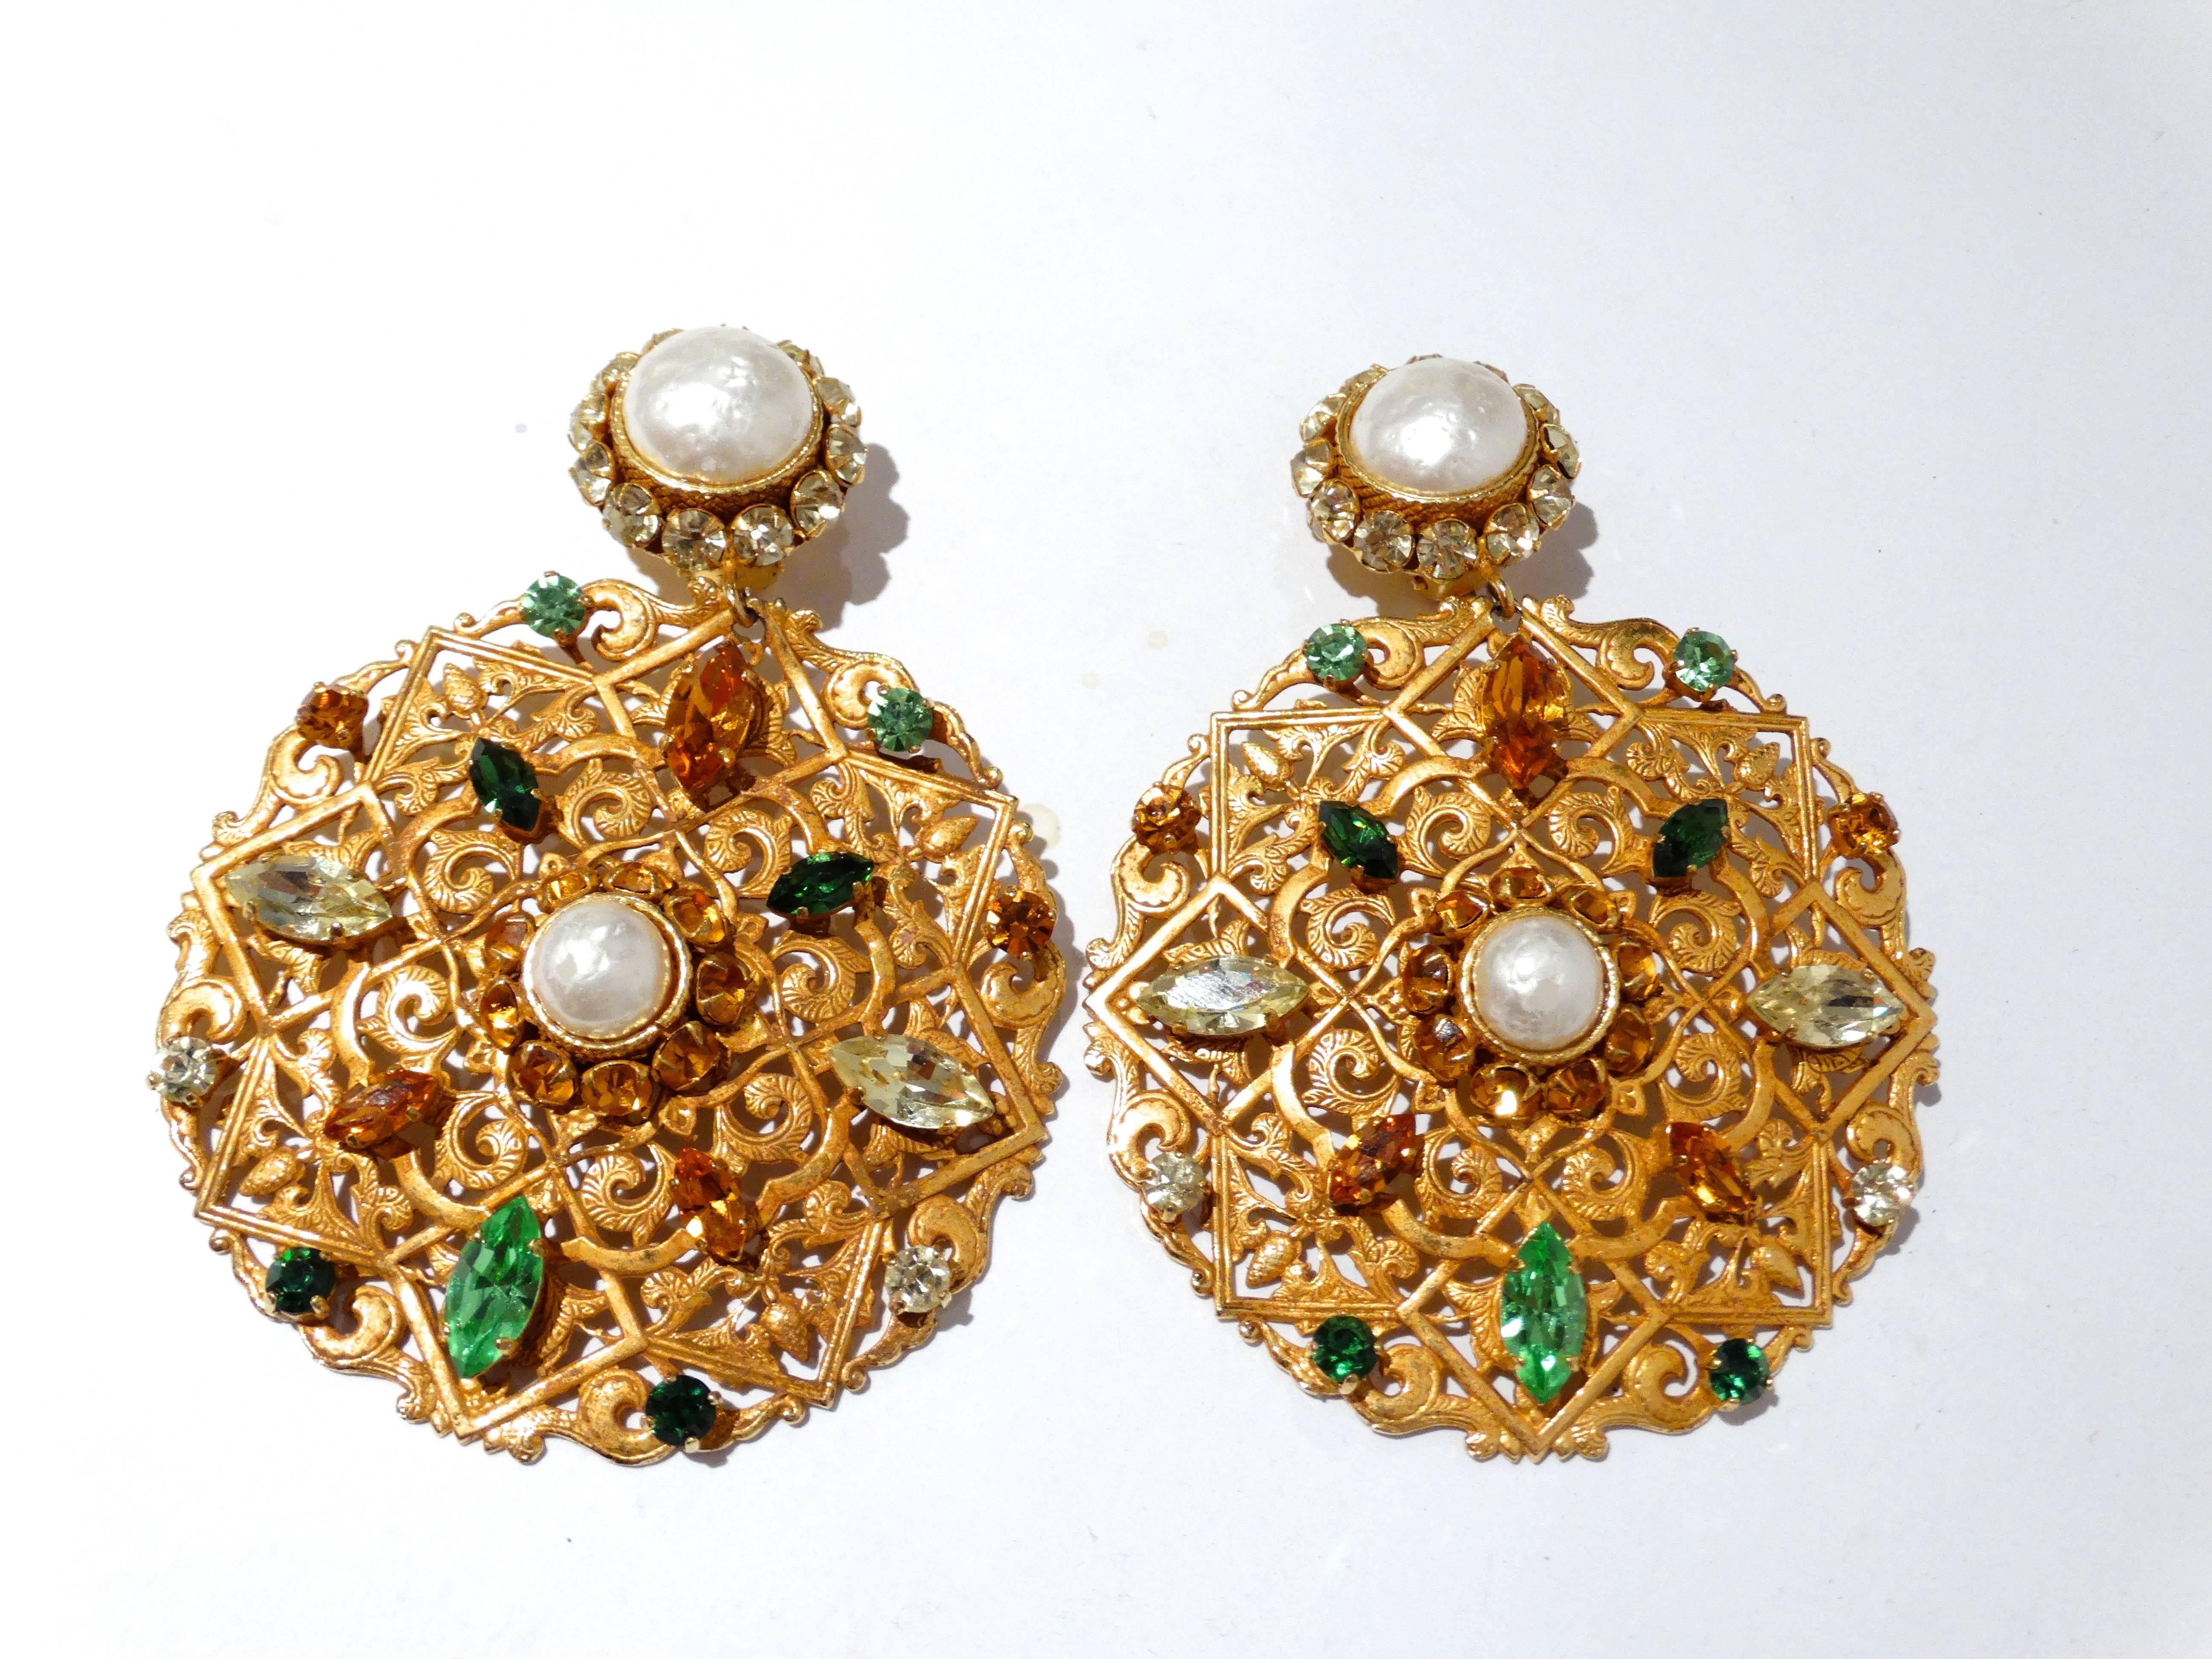 Beautiful 1980's Dominique Aurientis runway clip earrings. Features large top faux pearl with large medallion moroccan lace disc with pearls and rhinestones. A true piece of art, both earrings signed Dominique Aurients Paris. Clip closures in